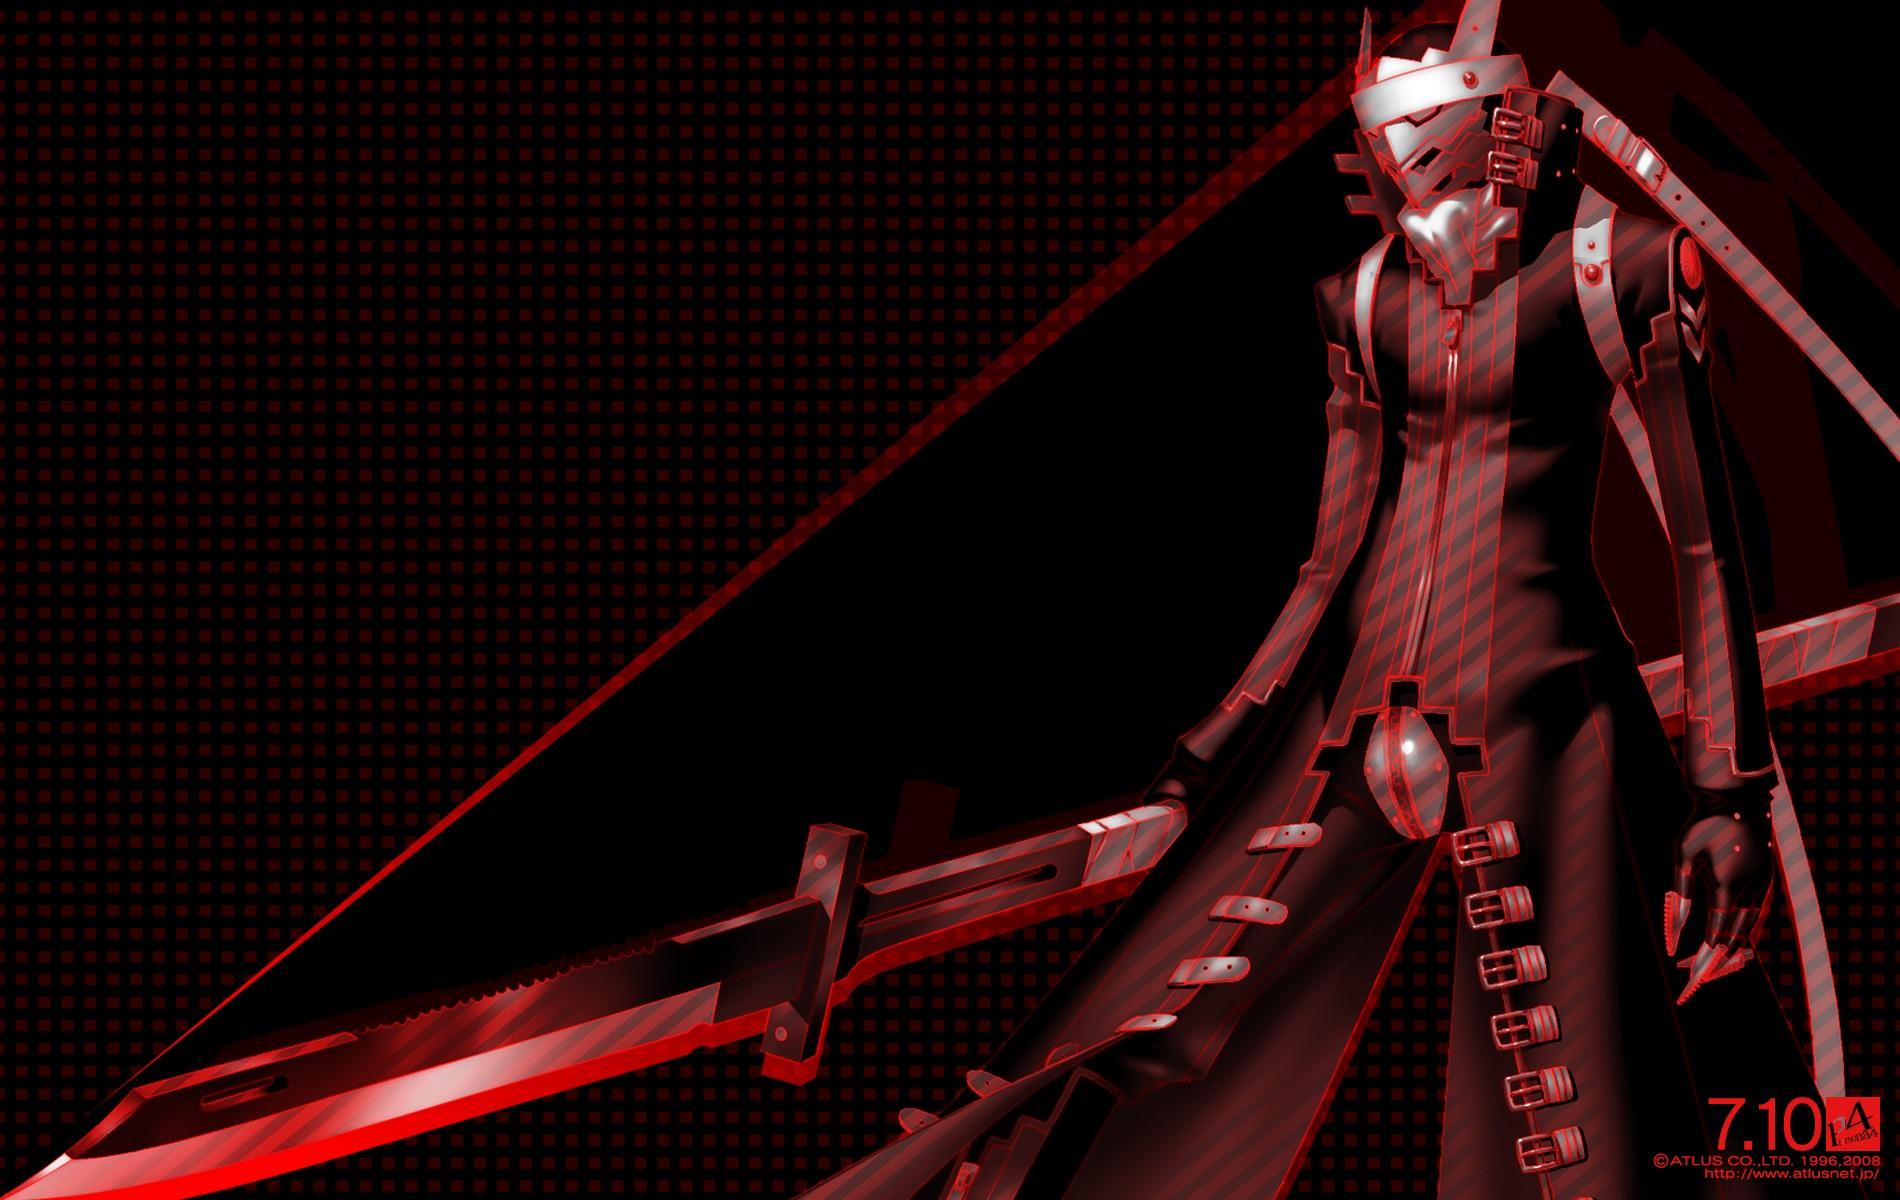 40+] Red and Black Anime Wallpapers